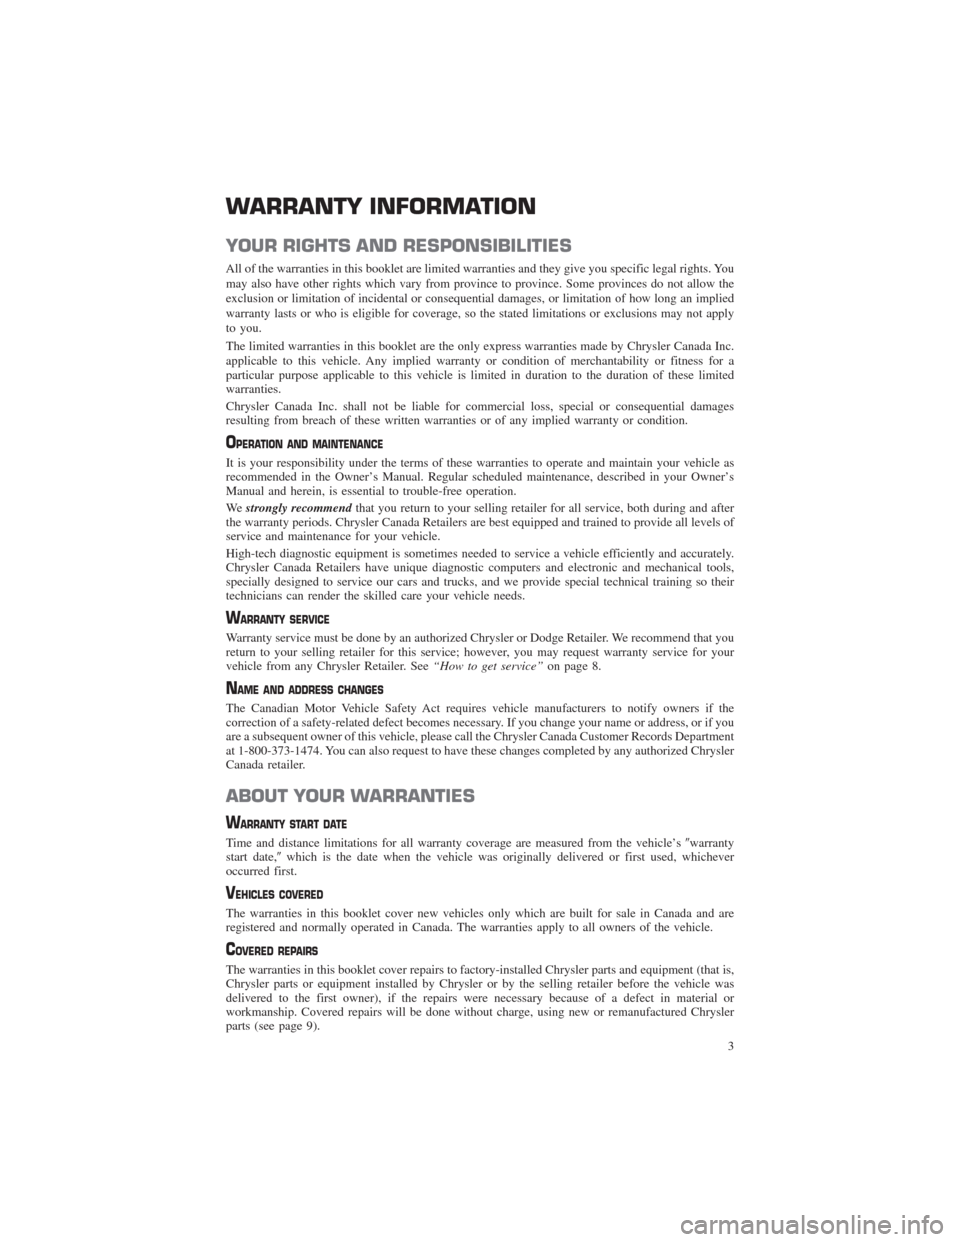 CHRYSLER 300 2014 2.G Warranty Booklet WARRANTY INFORMATION
YOUR RIGHTS AND RESPONSIBILITIES
All of the warranties in this booklet are limited warranties and they give you specific legal rights. You
may also have other rights which vary fr